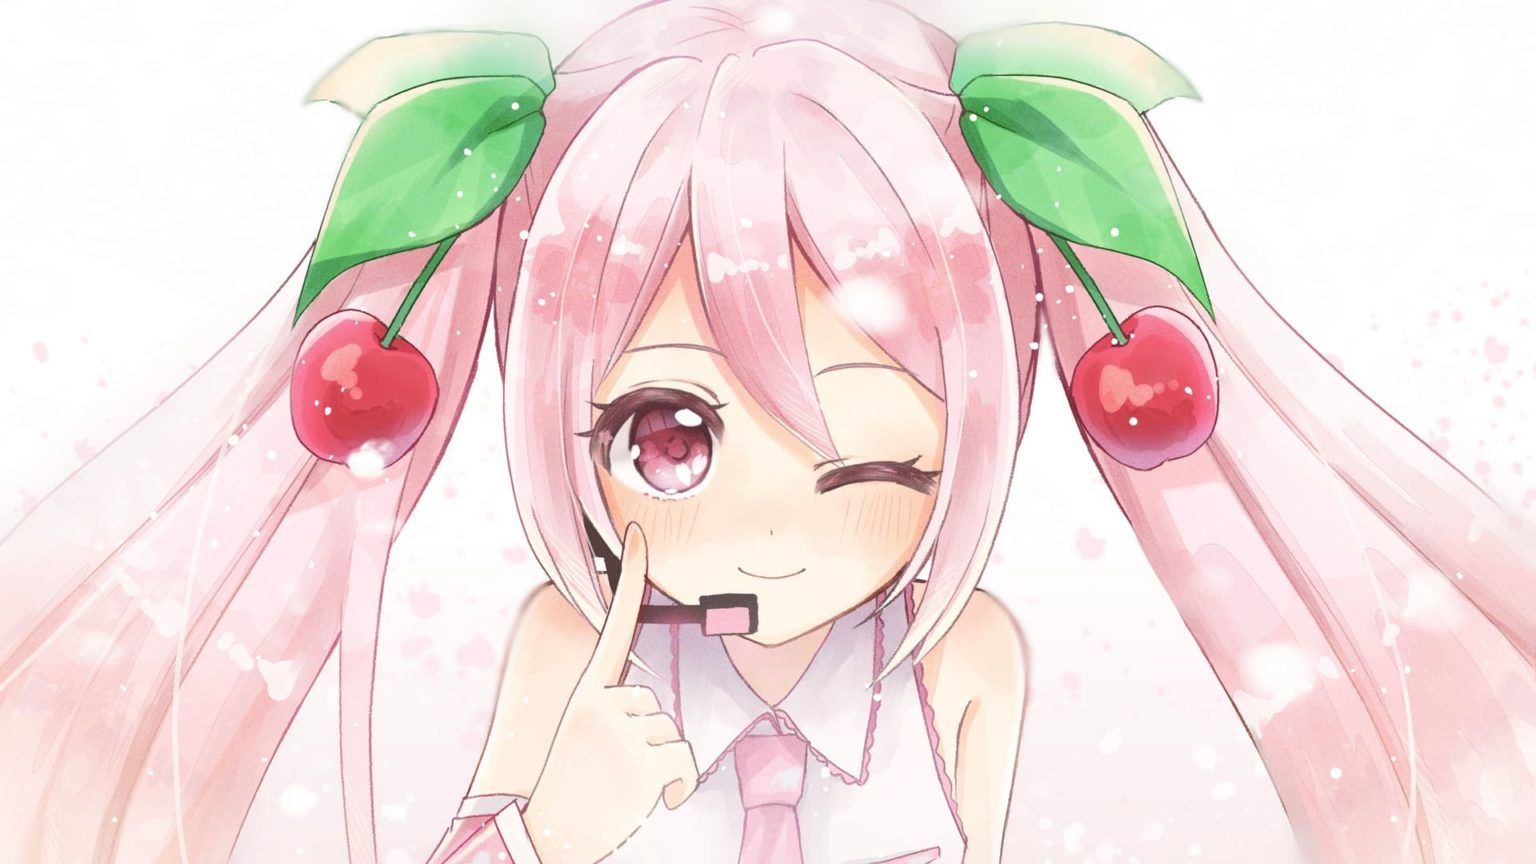 Anime girl with pink hair and cherries - Pink anime